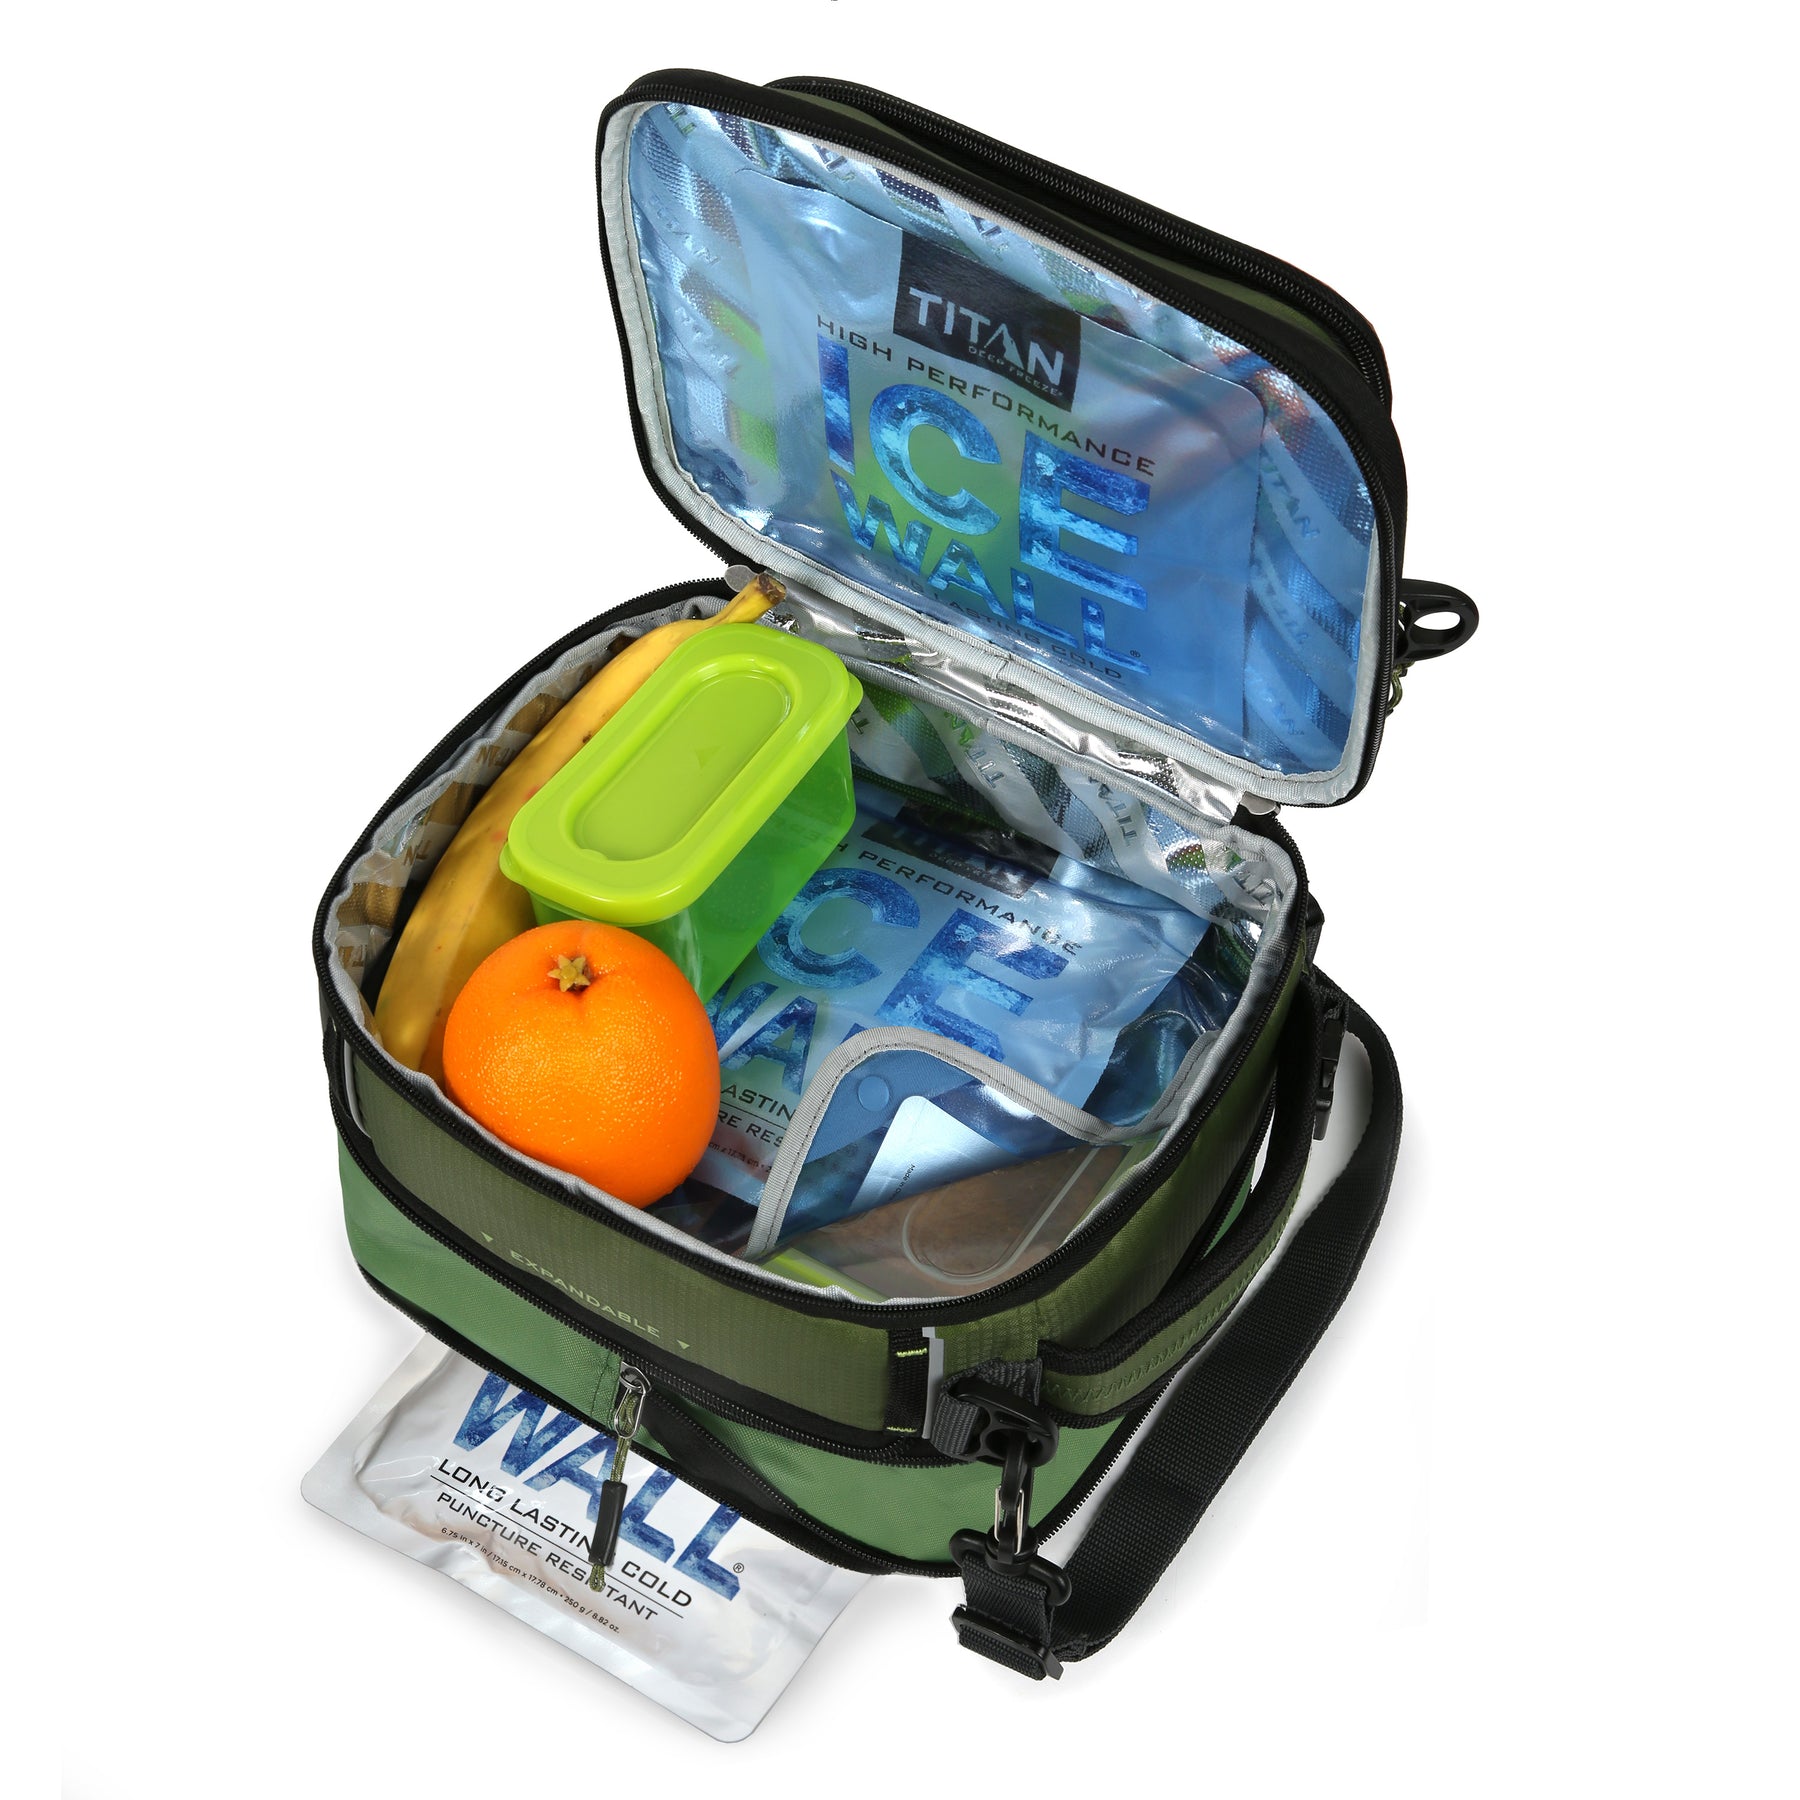 Titan Arctic Zone Fridge Cold, Crush Resistant Lunch Pack with 2